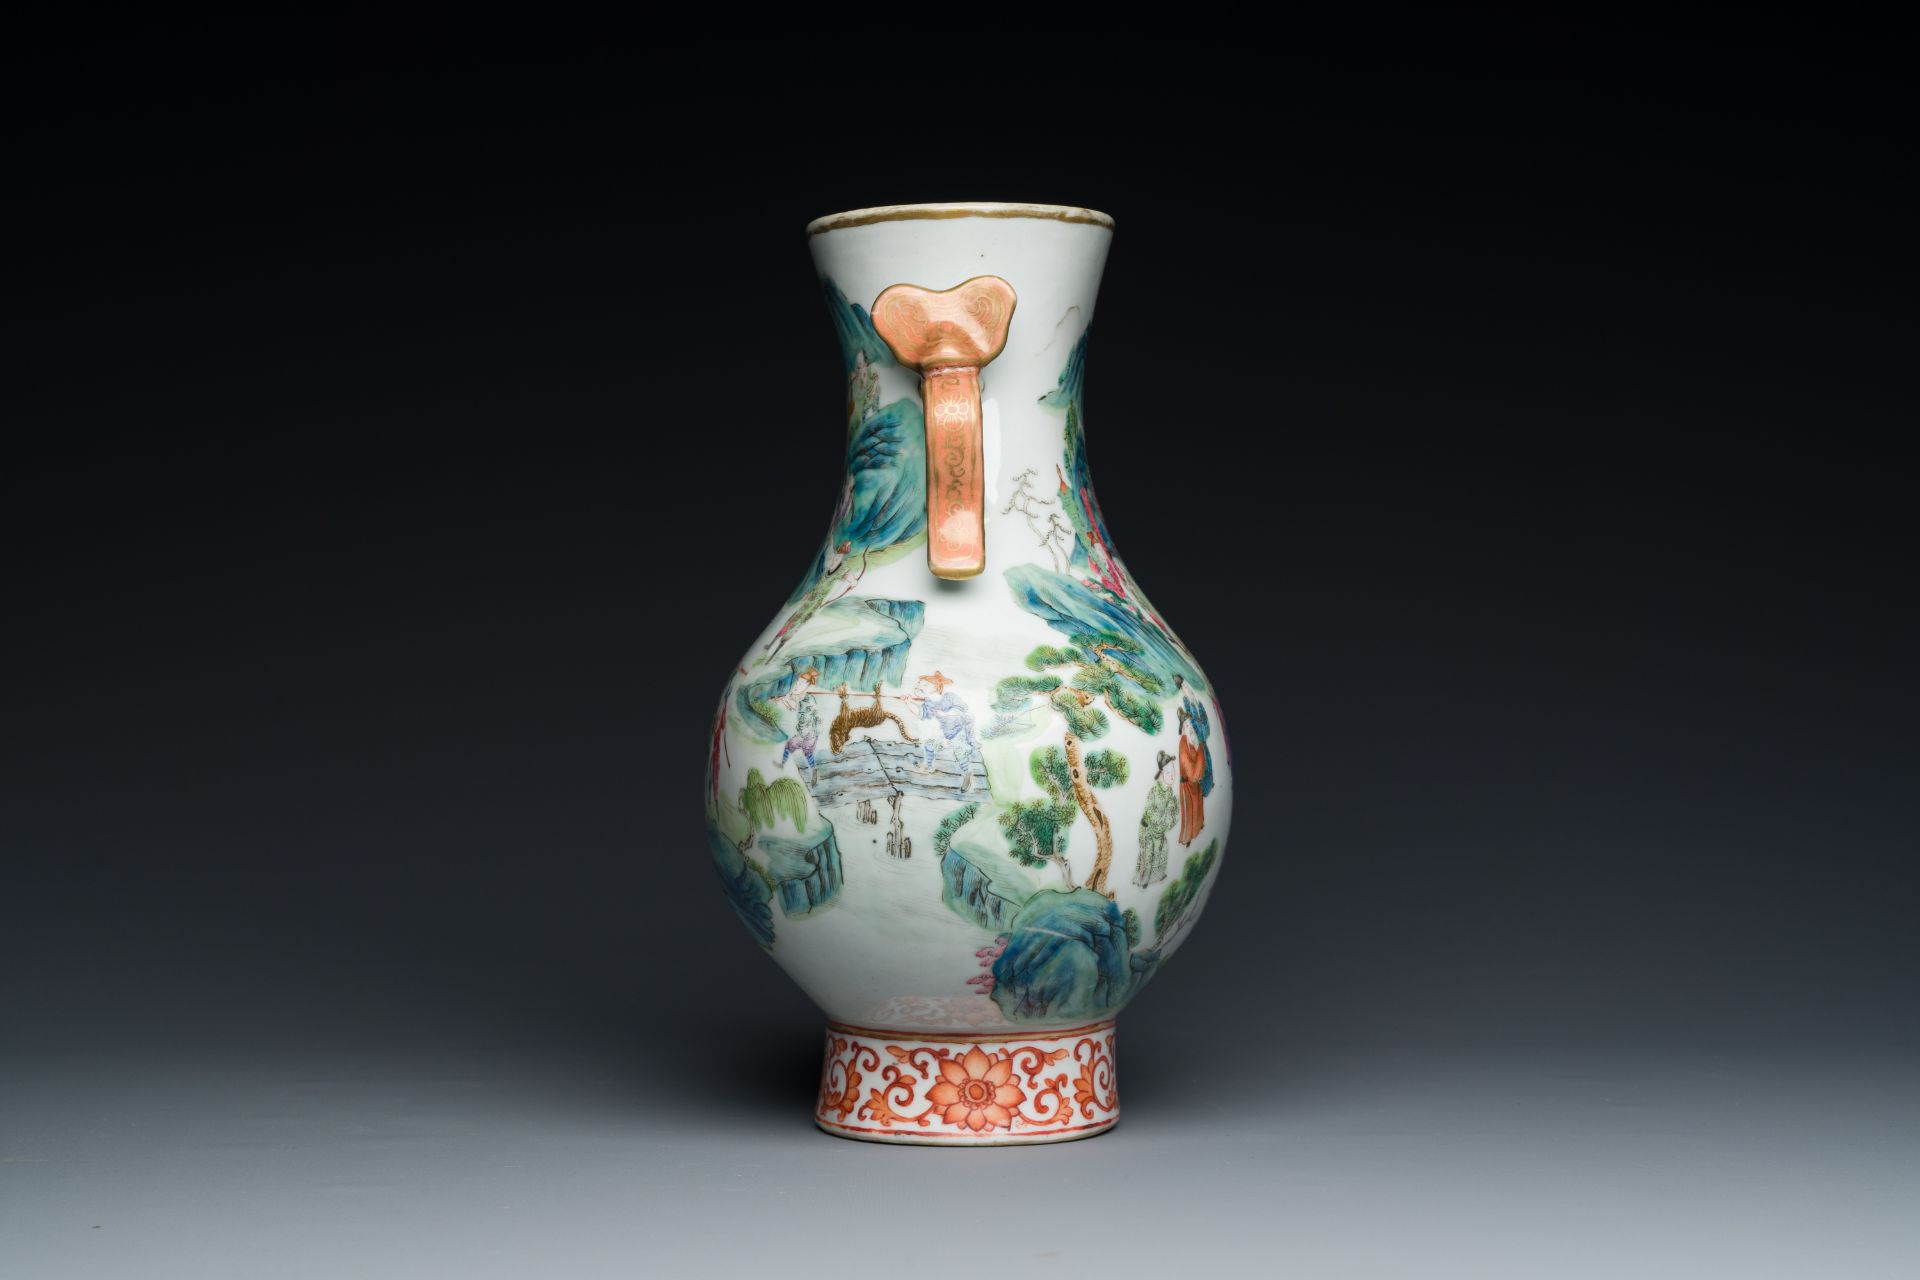 A fine Chinese famille rose 'hu' vase with ruyi handles, 19th C. - Image 4 of 6